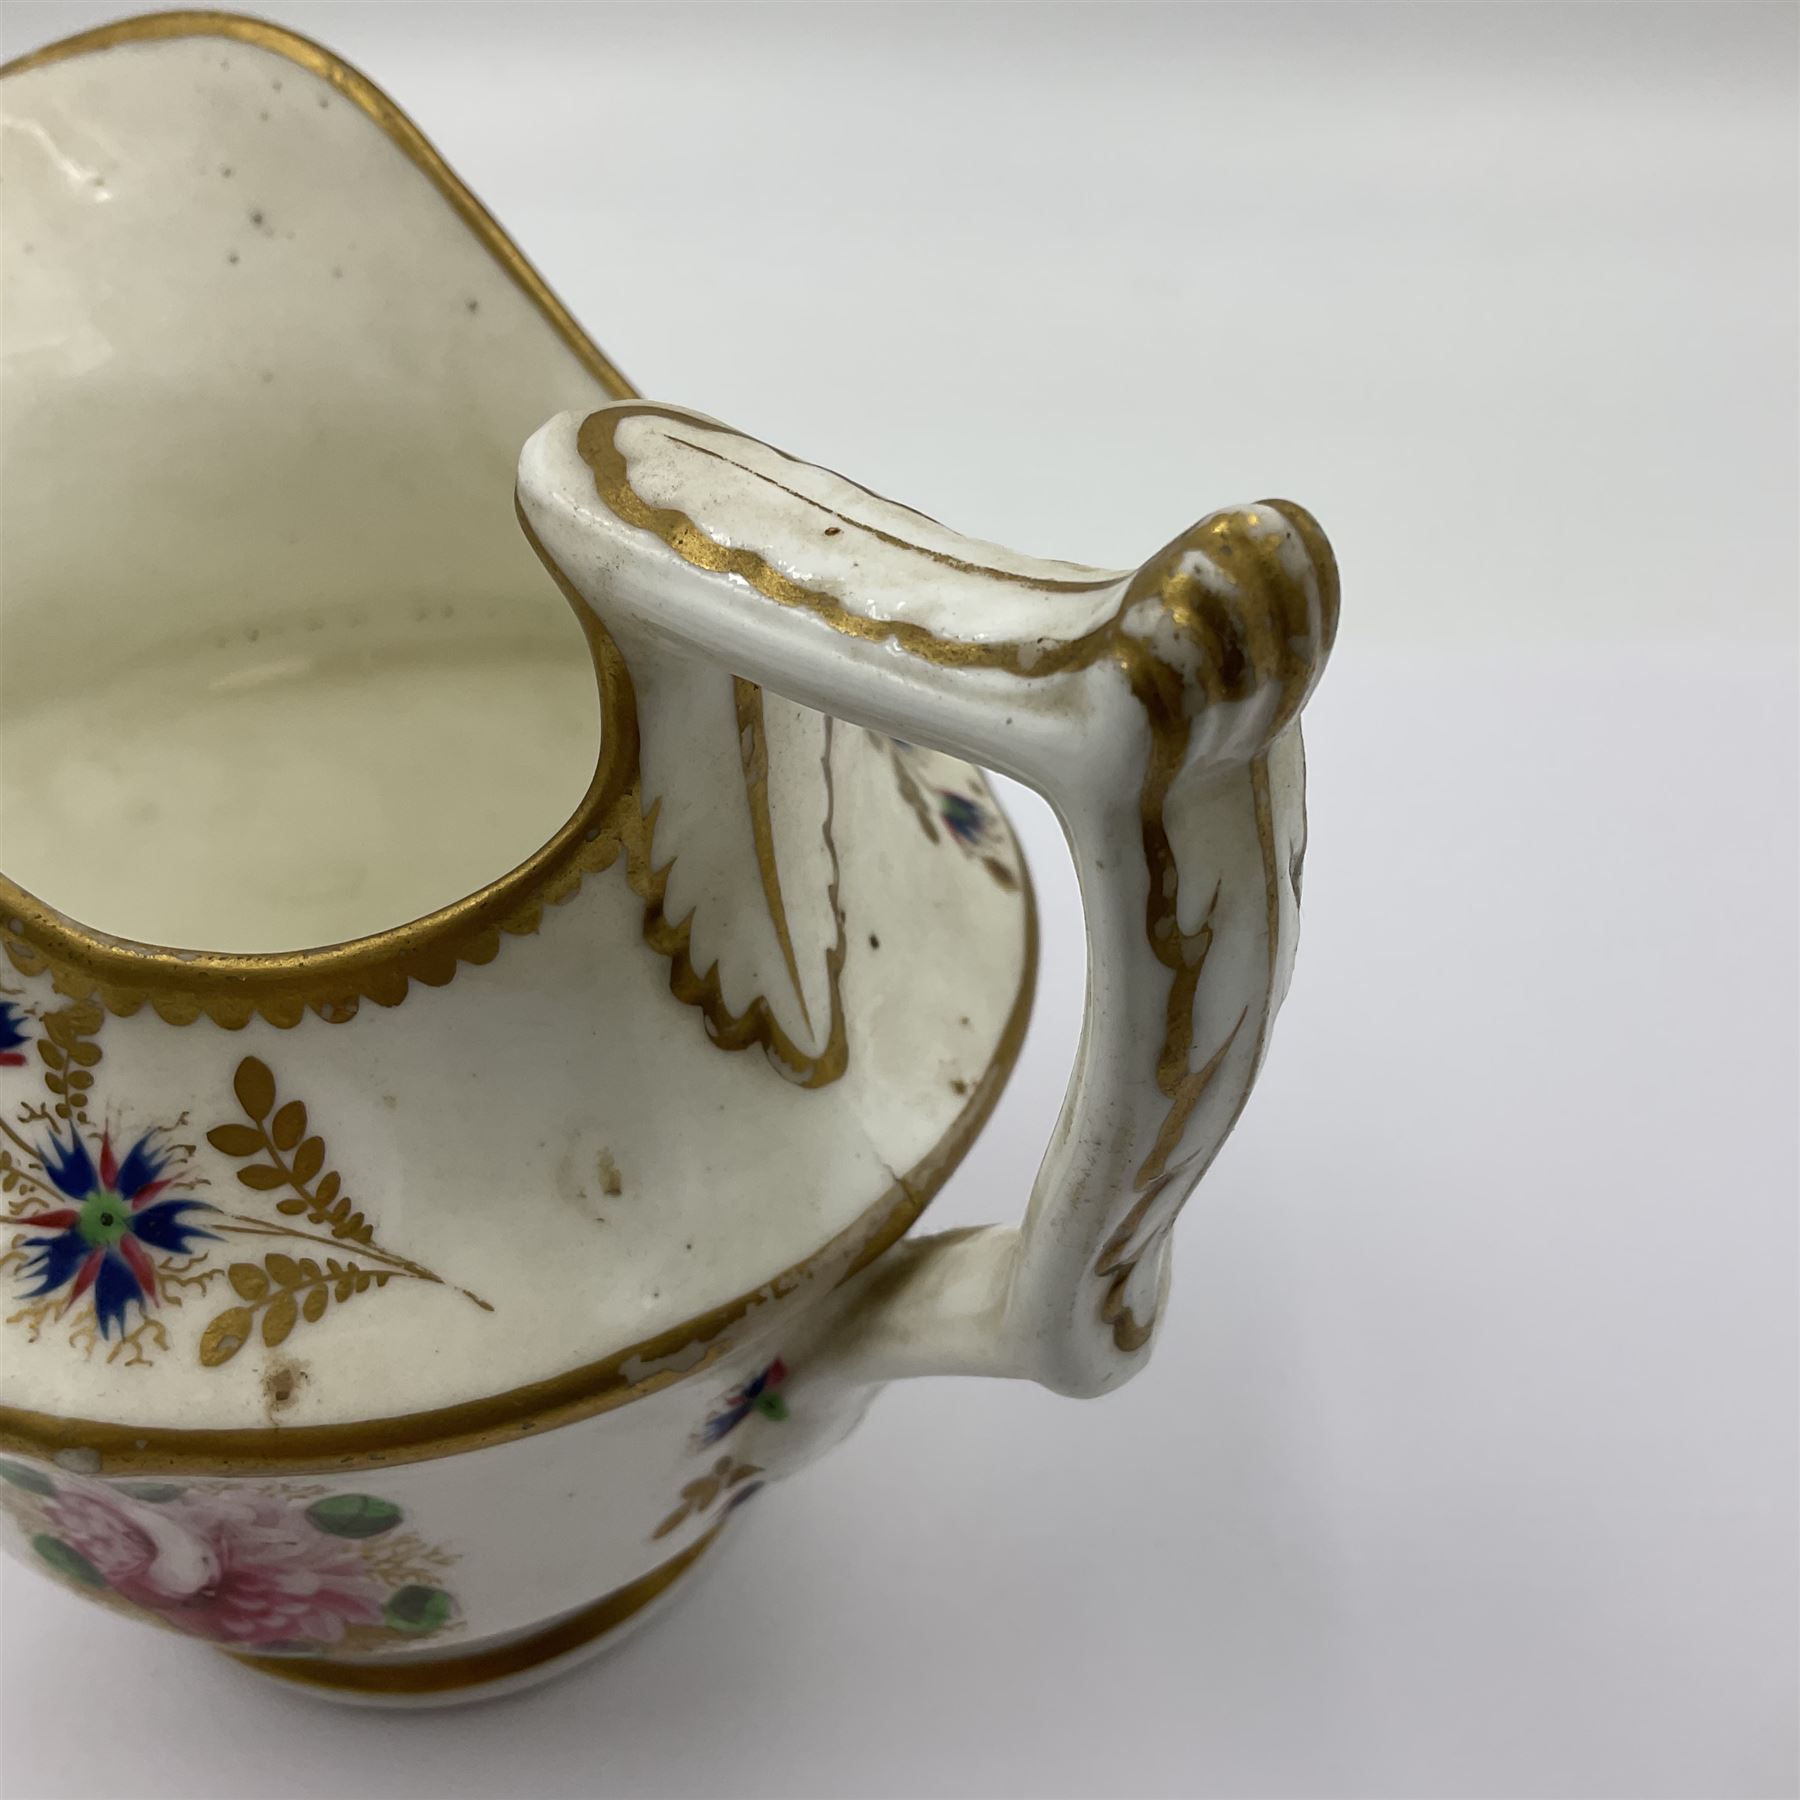 19th century Thomas Goode and Co jug - Image 15 of 22